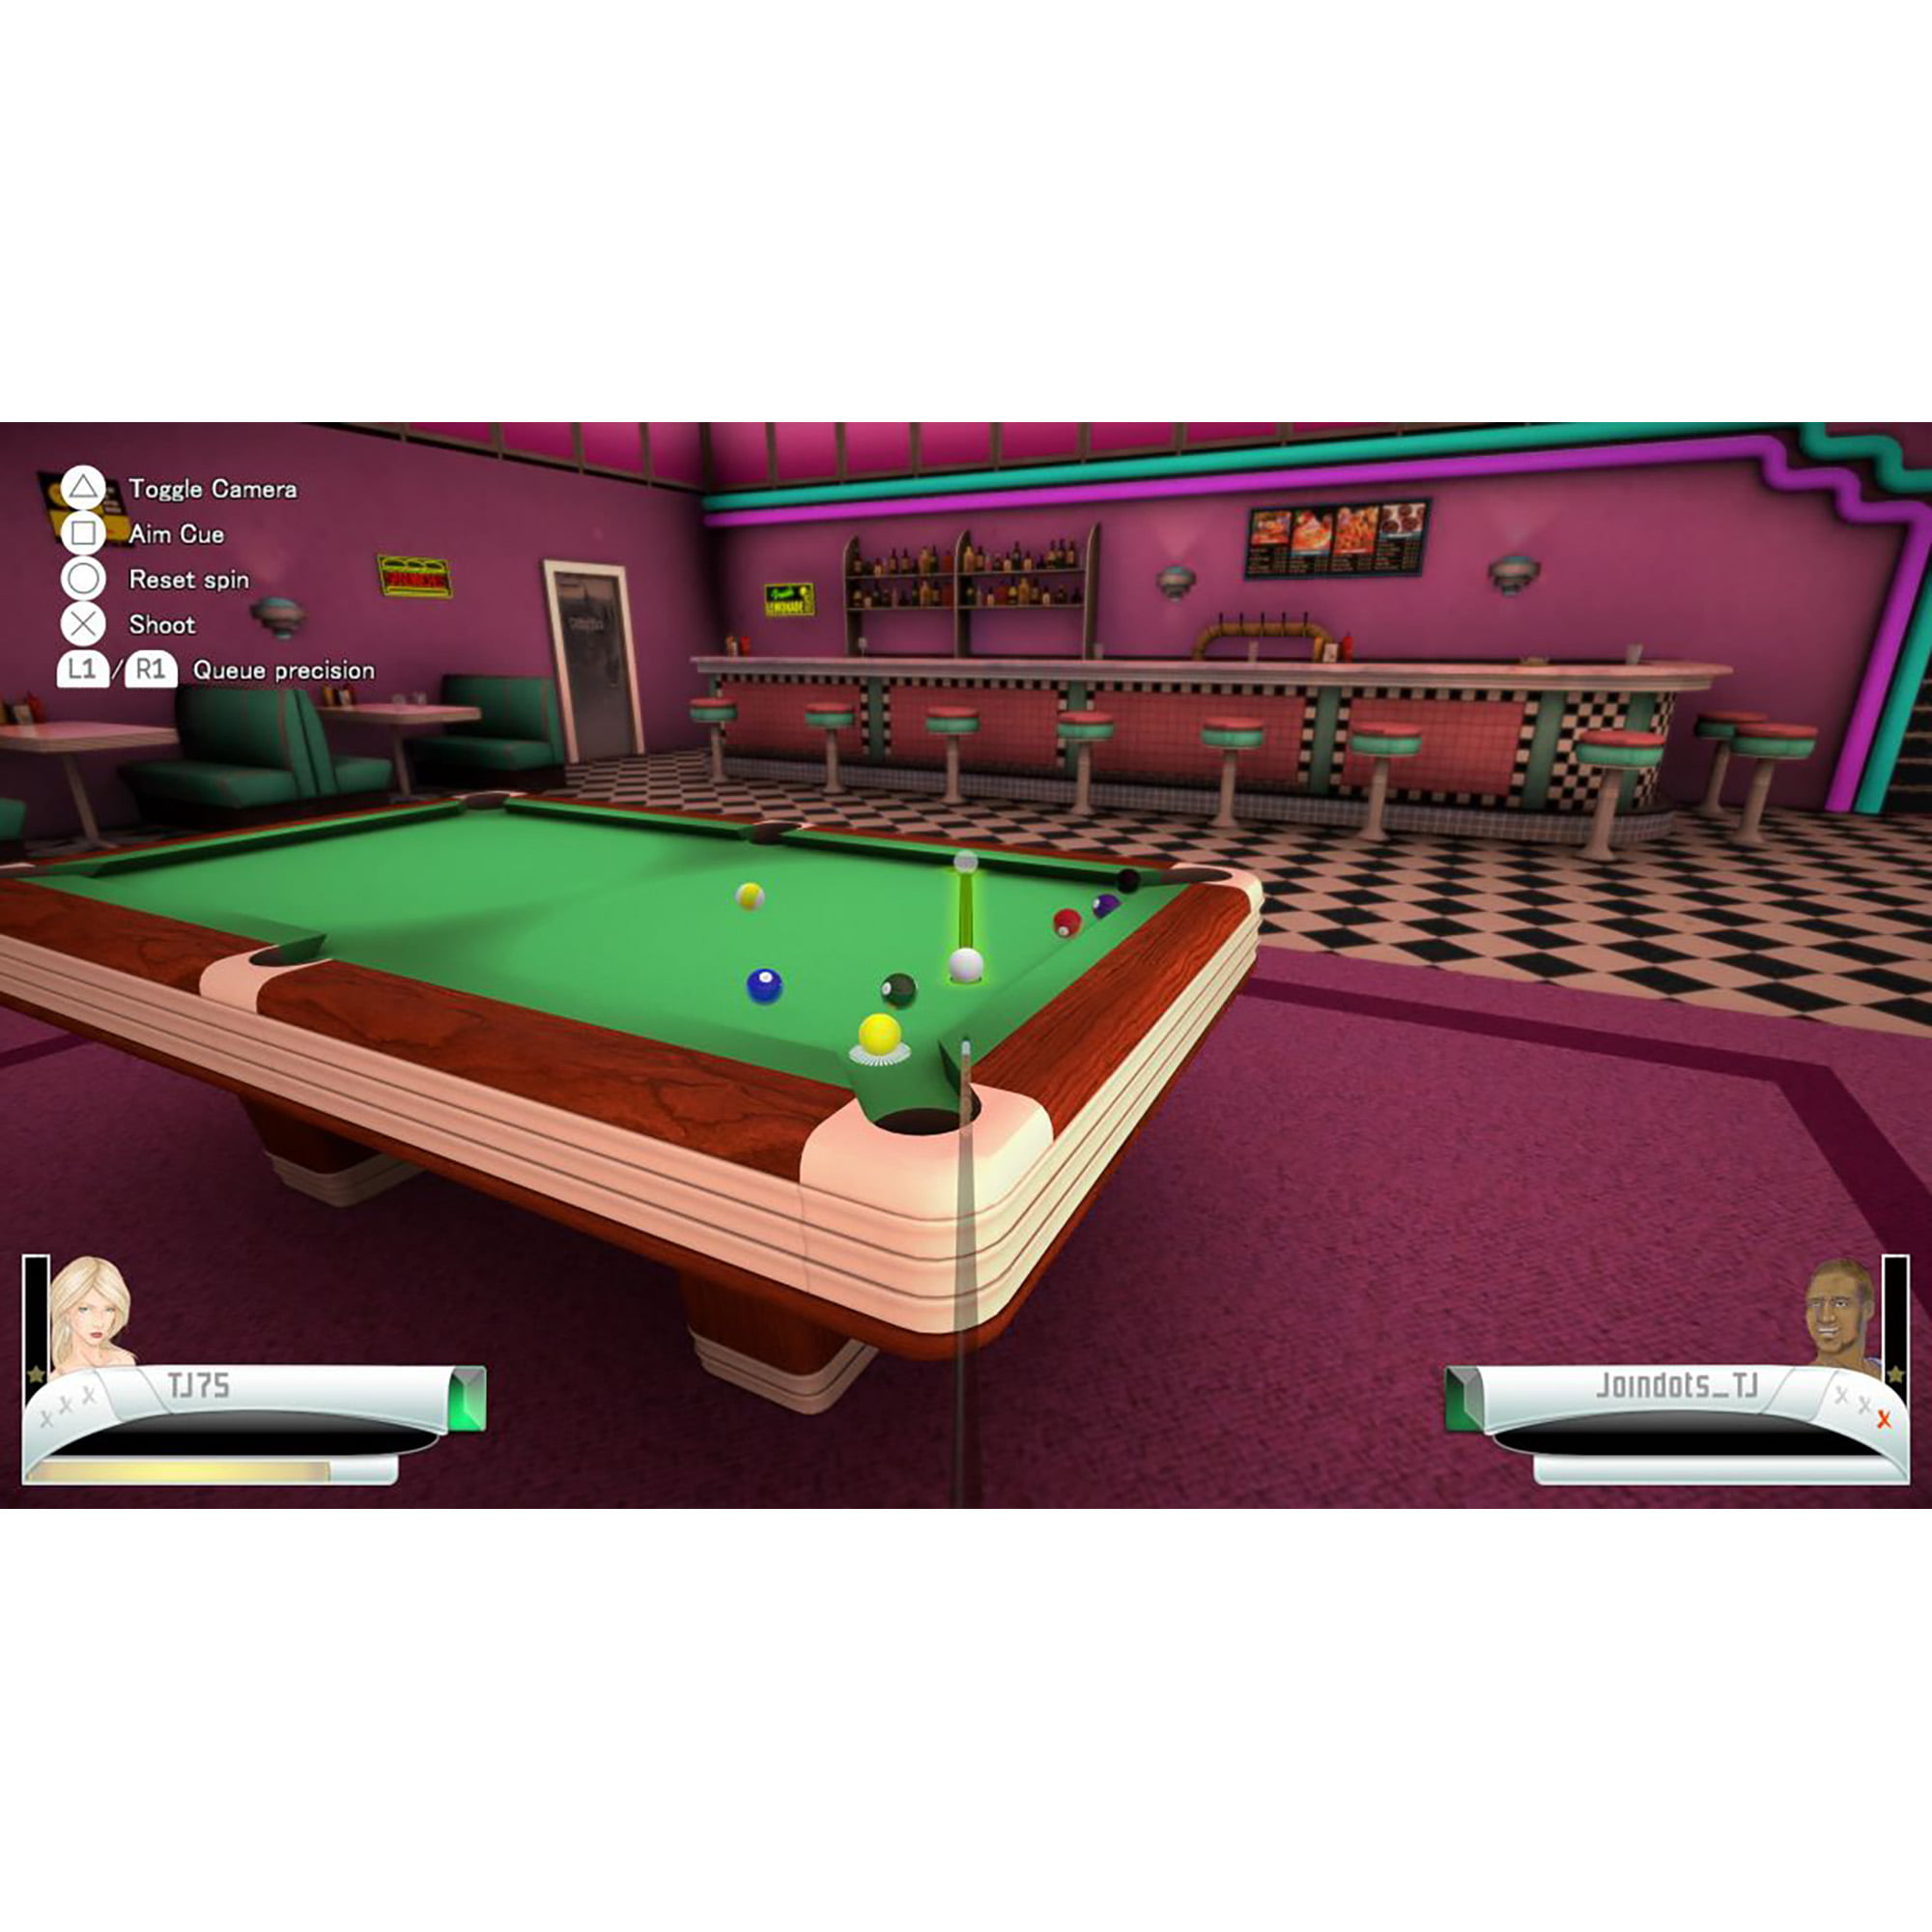 Download Pool Billiards Pro for PC/ Pool Billiards Pro on PC - Andy -  Android Emulator for PC & Mac